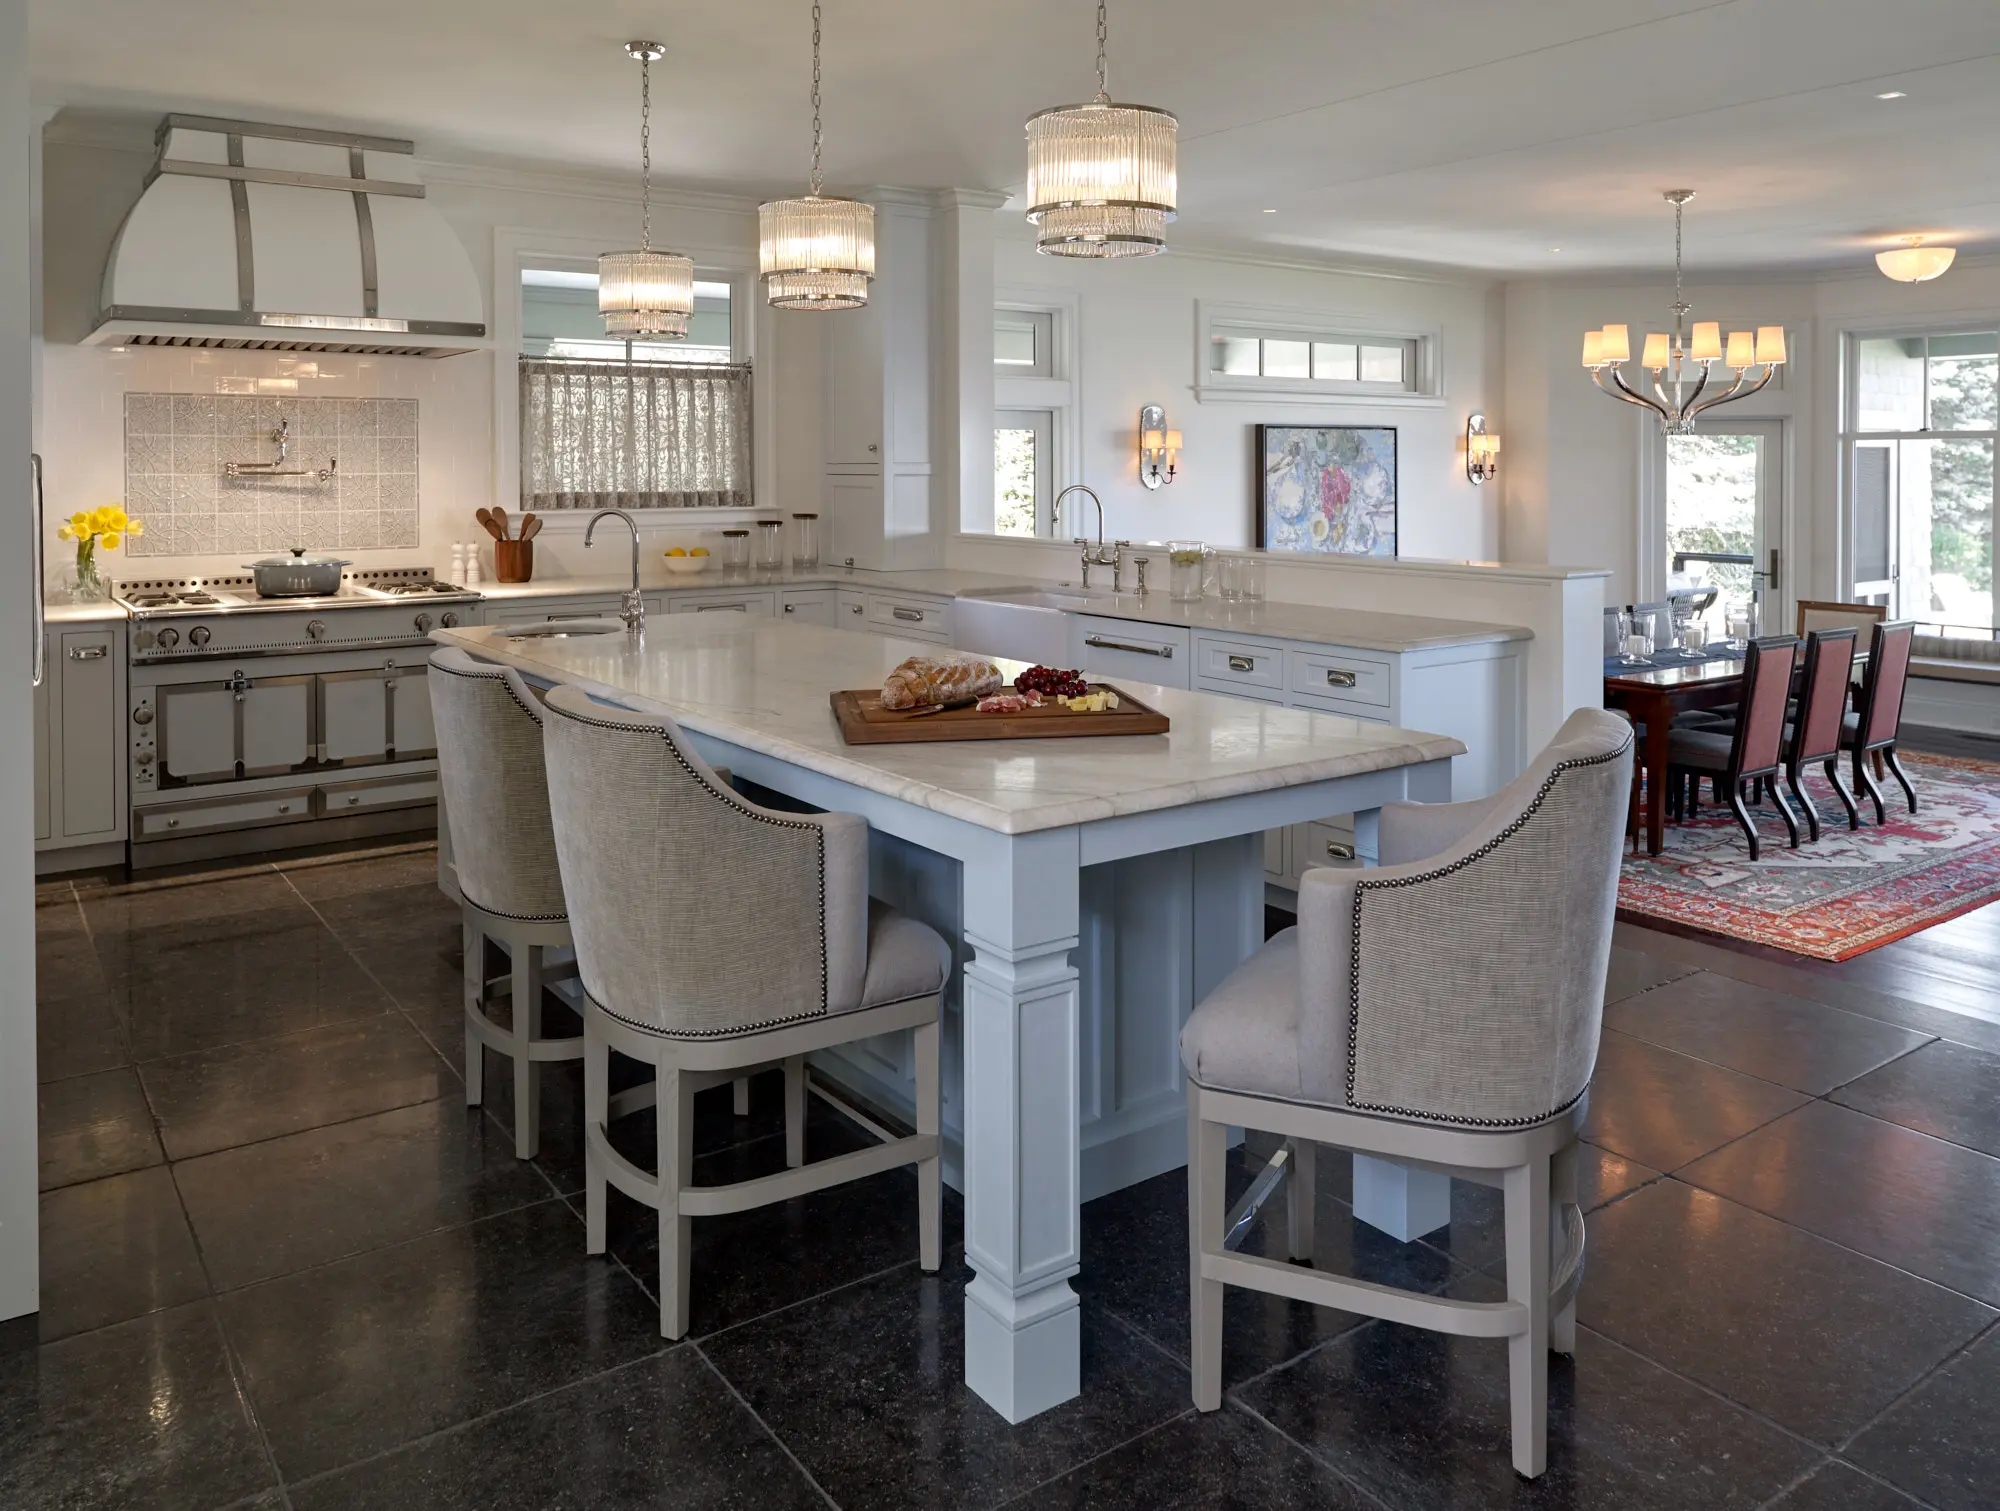 Large open concept kitchen and dining area with tile flooring and white marble countertops.